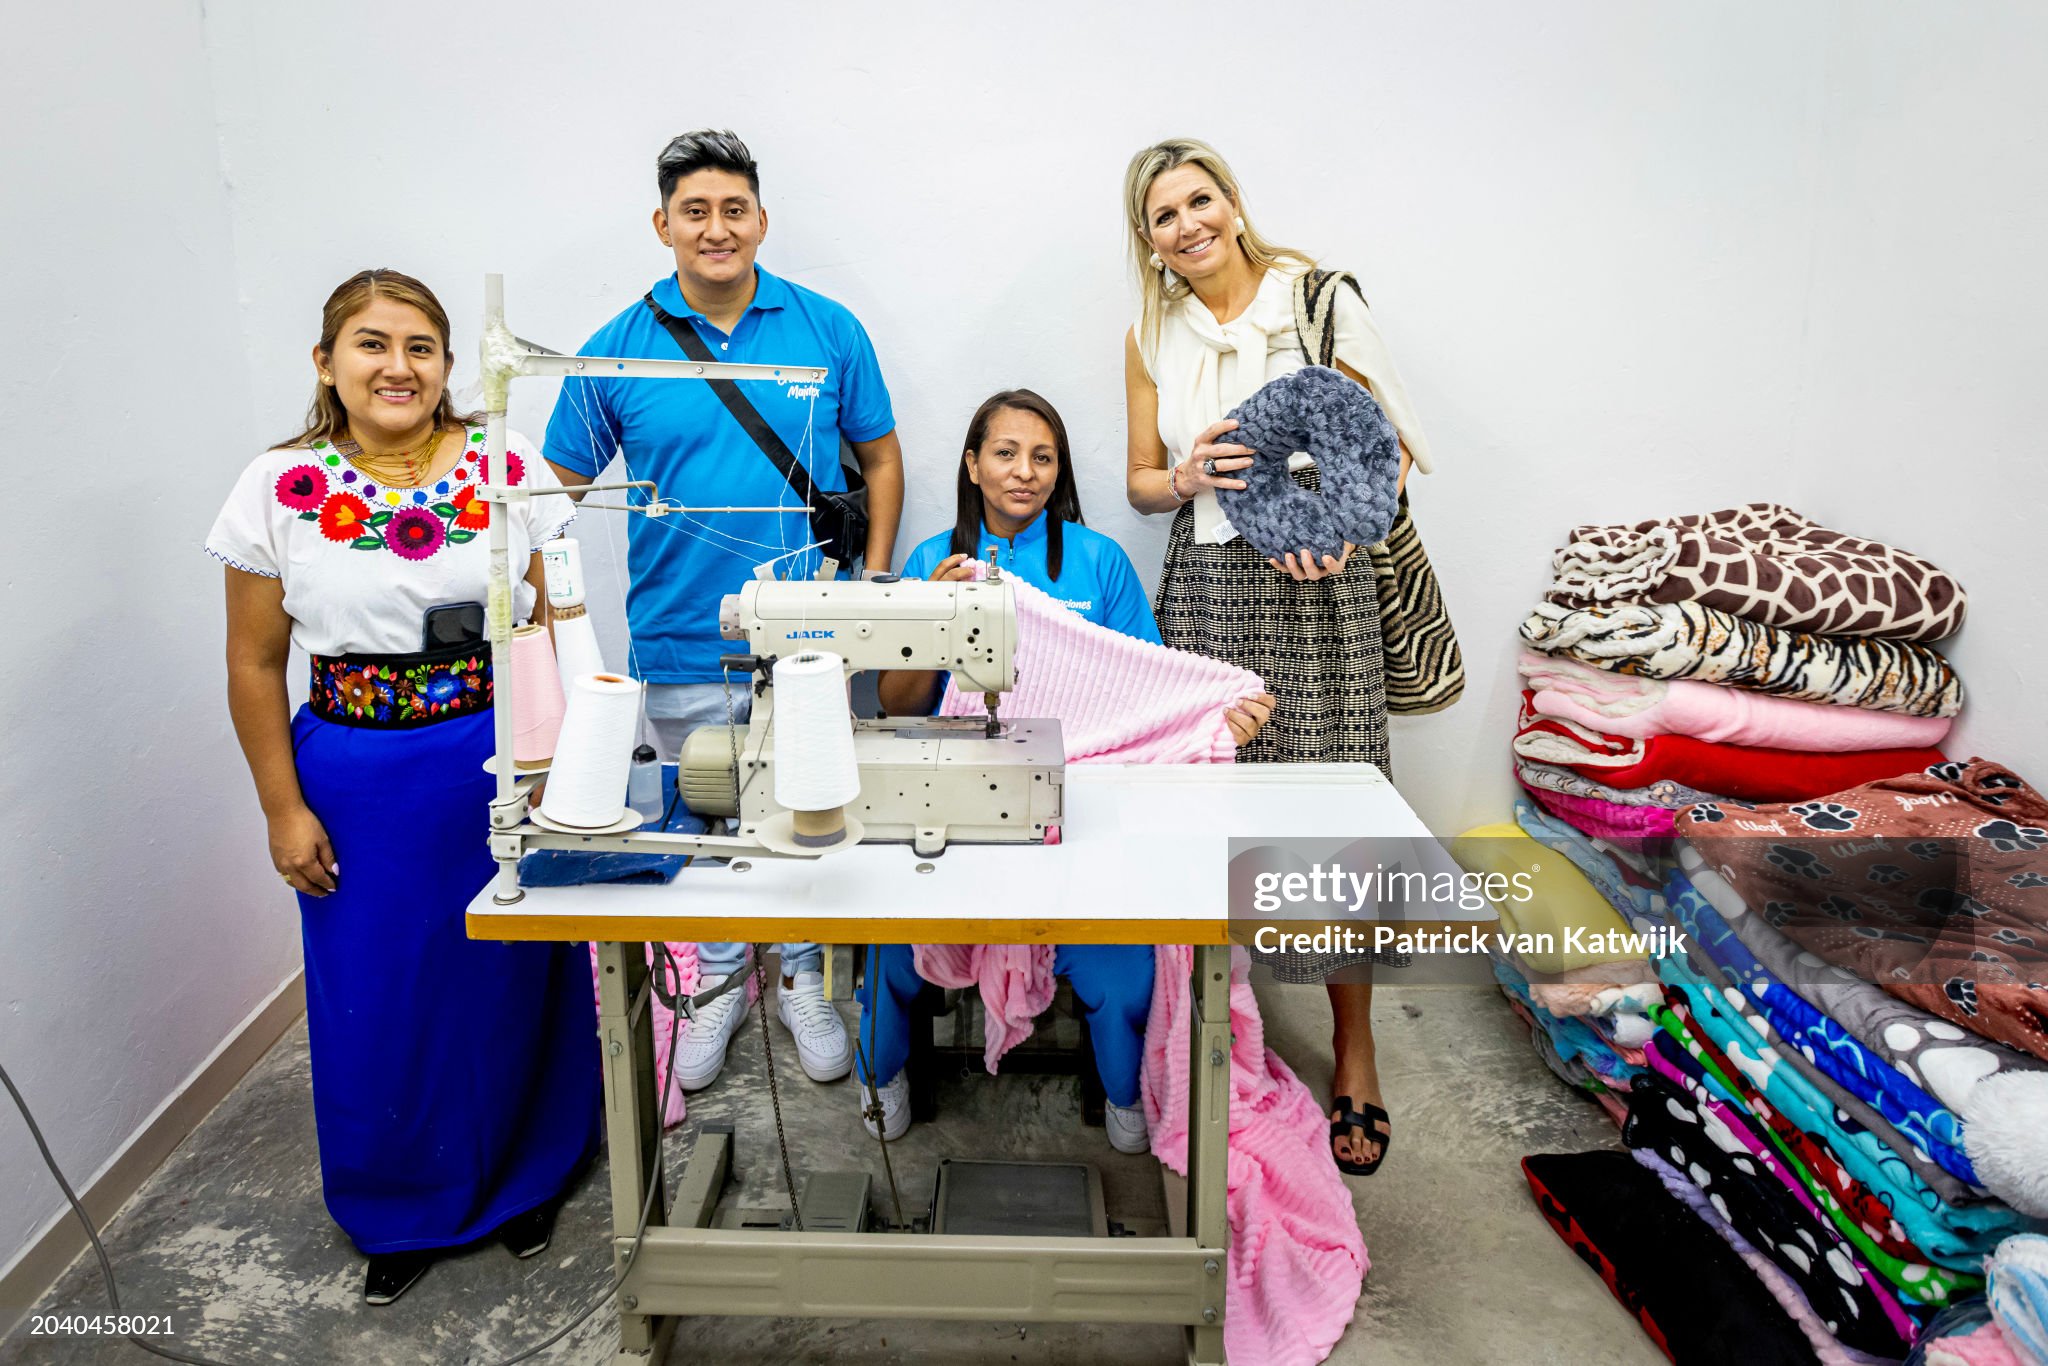 queen-maxima-of-the-netherlands-meets-textile-workerscolombia-day-one.jpg?s=2048x2048&w=gi&k=20&c=YMtMvxgIKN0DgL9lkaMiVITeJR6693bO_6IsIlcVloE=